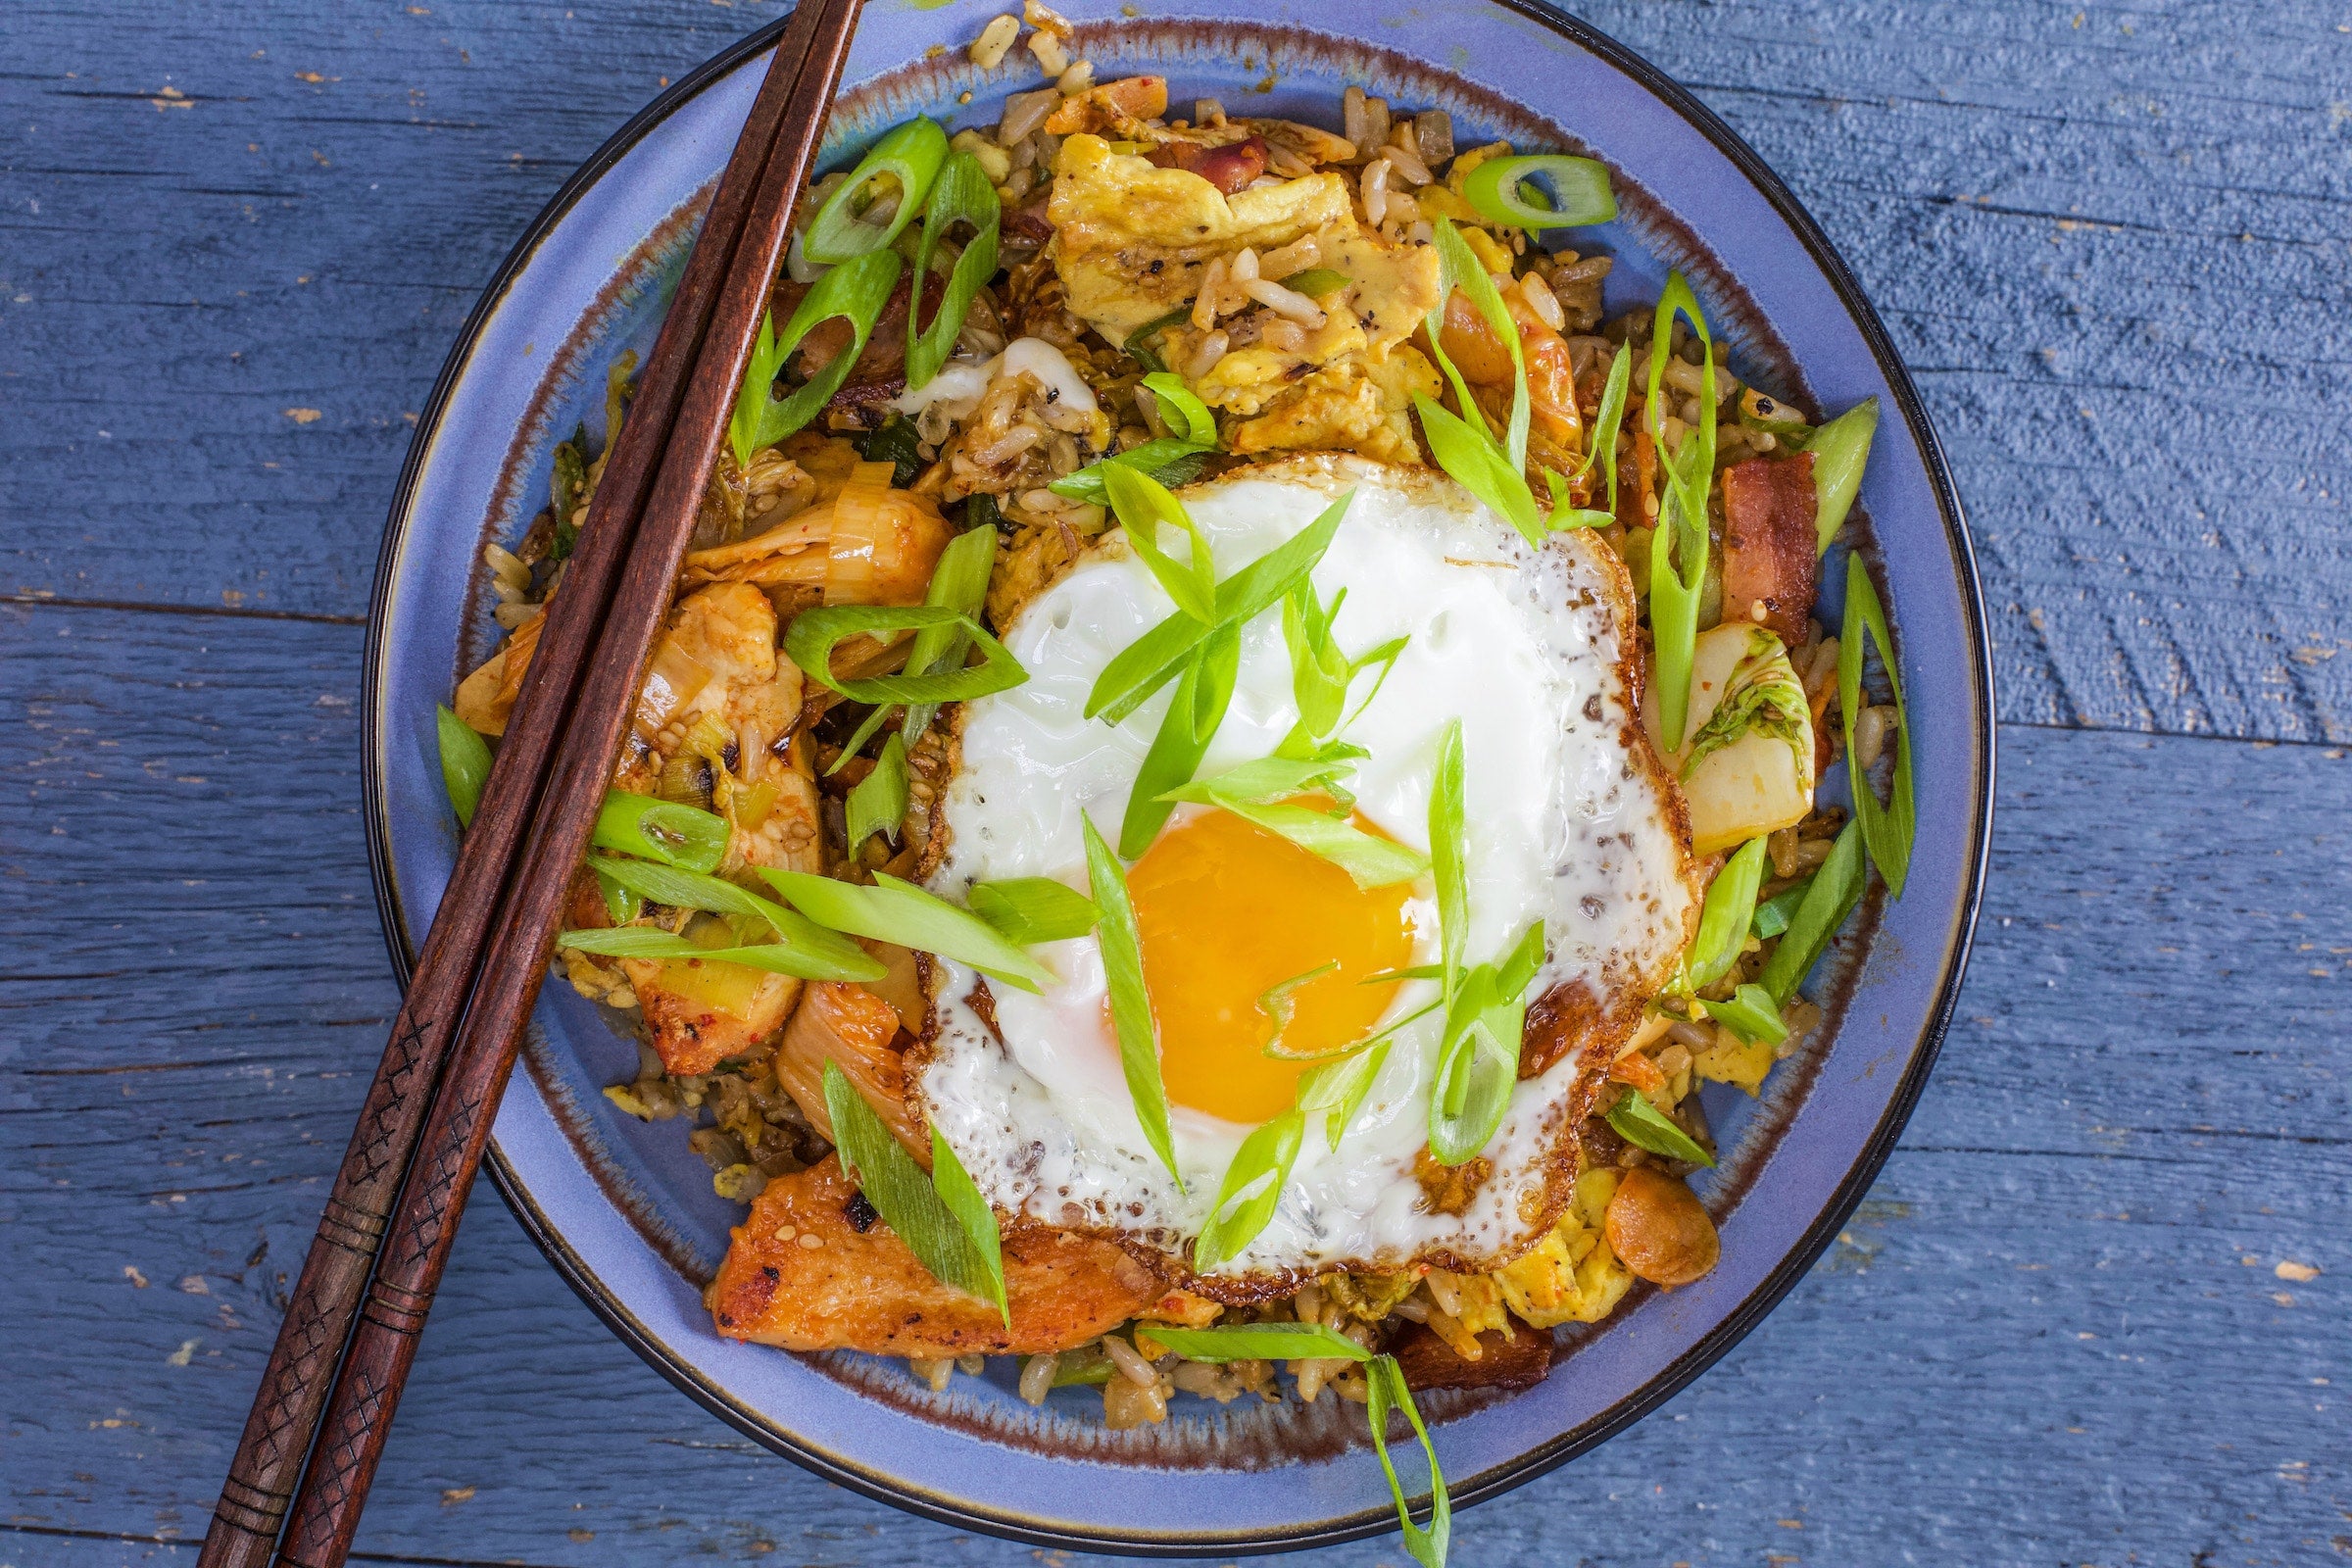 Rachael's Chicken and Kimchi Stir-Fry with Bacon and Egg Fried Rice